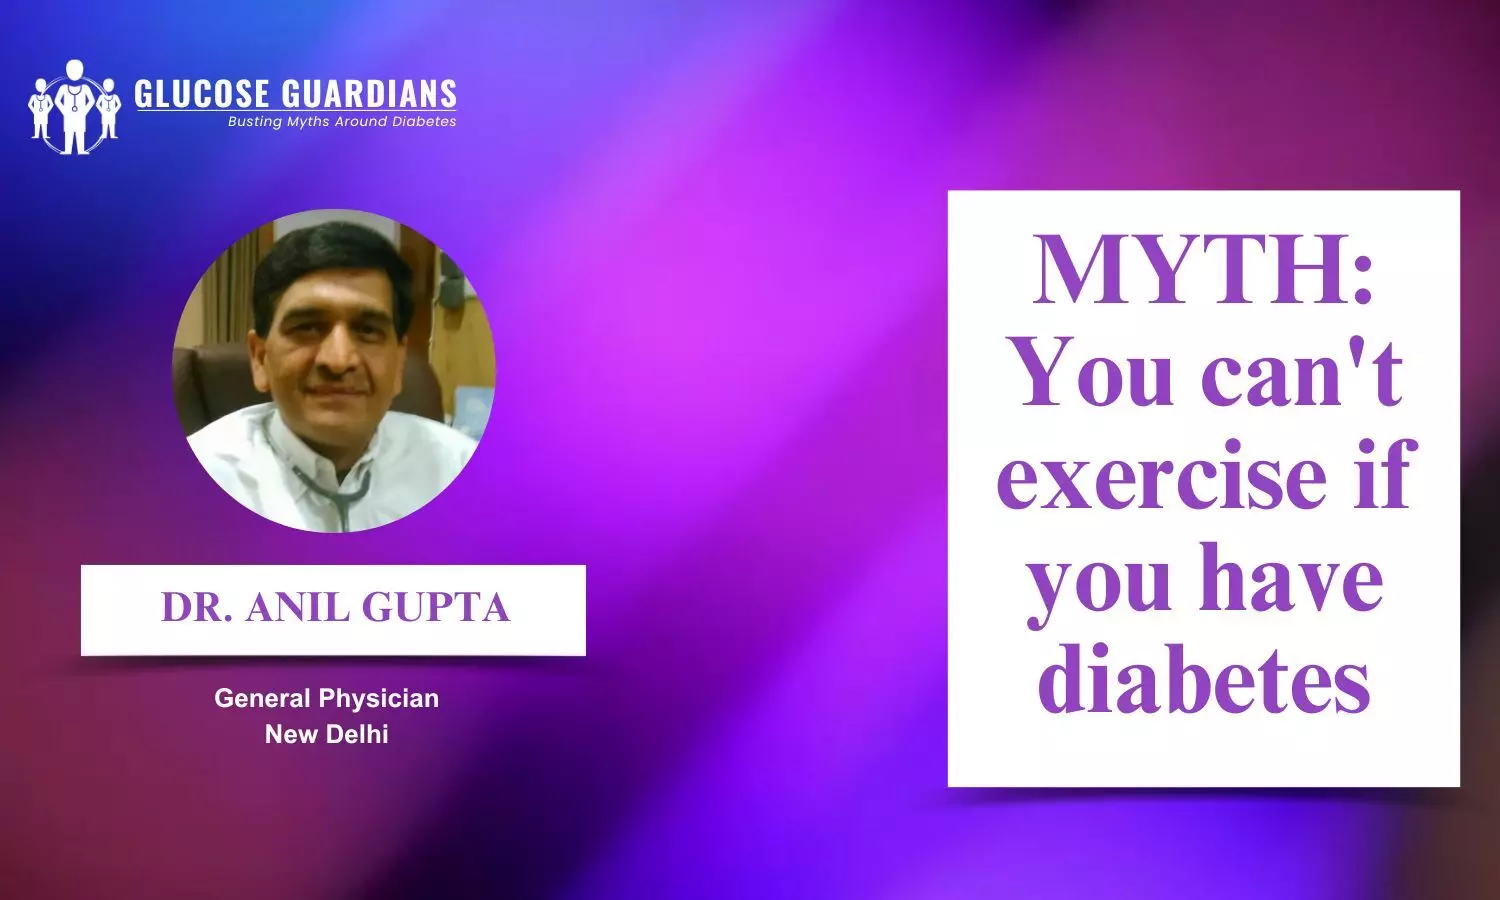 Can individuals with diabetes exercise? - Dr Anil Gupta